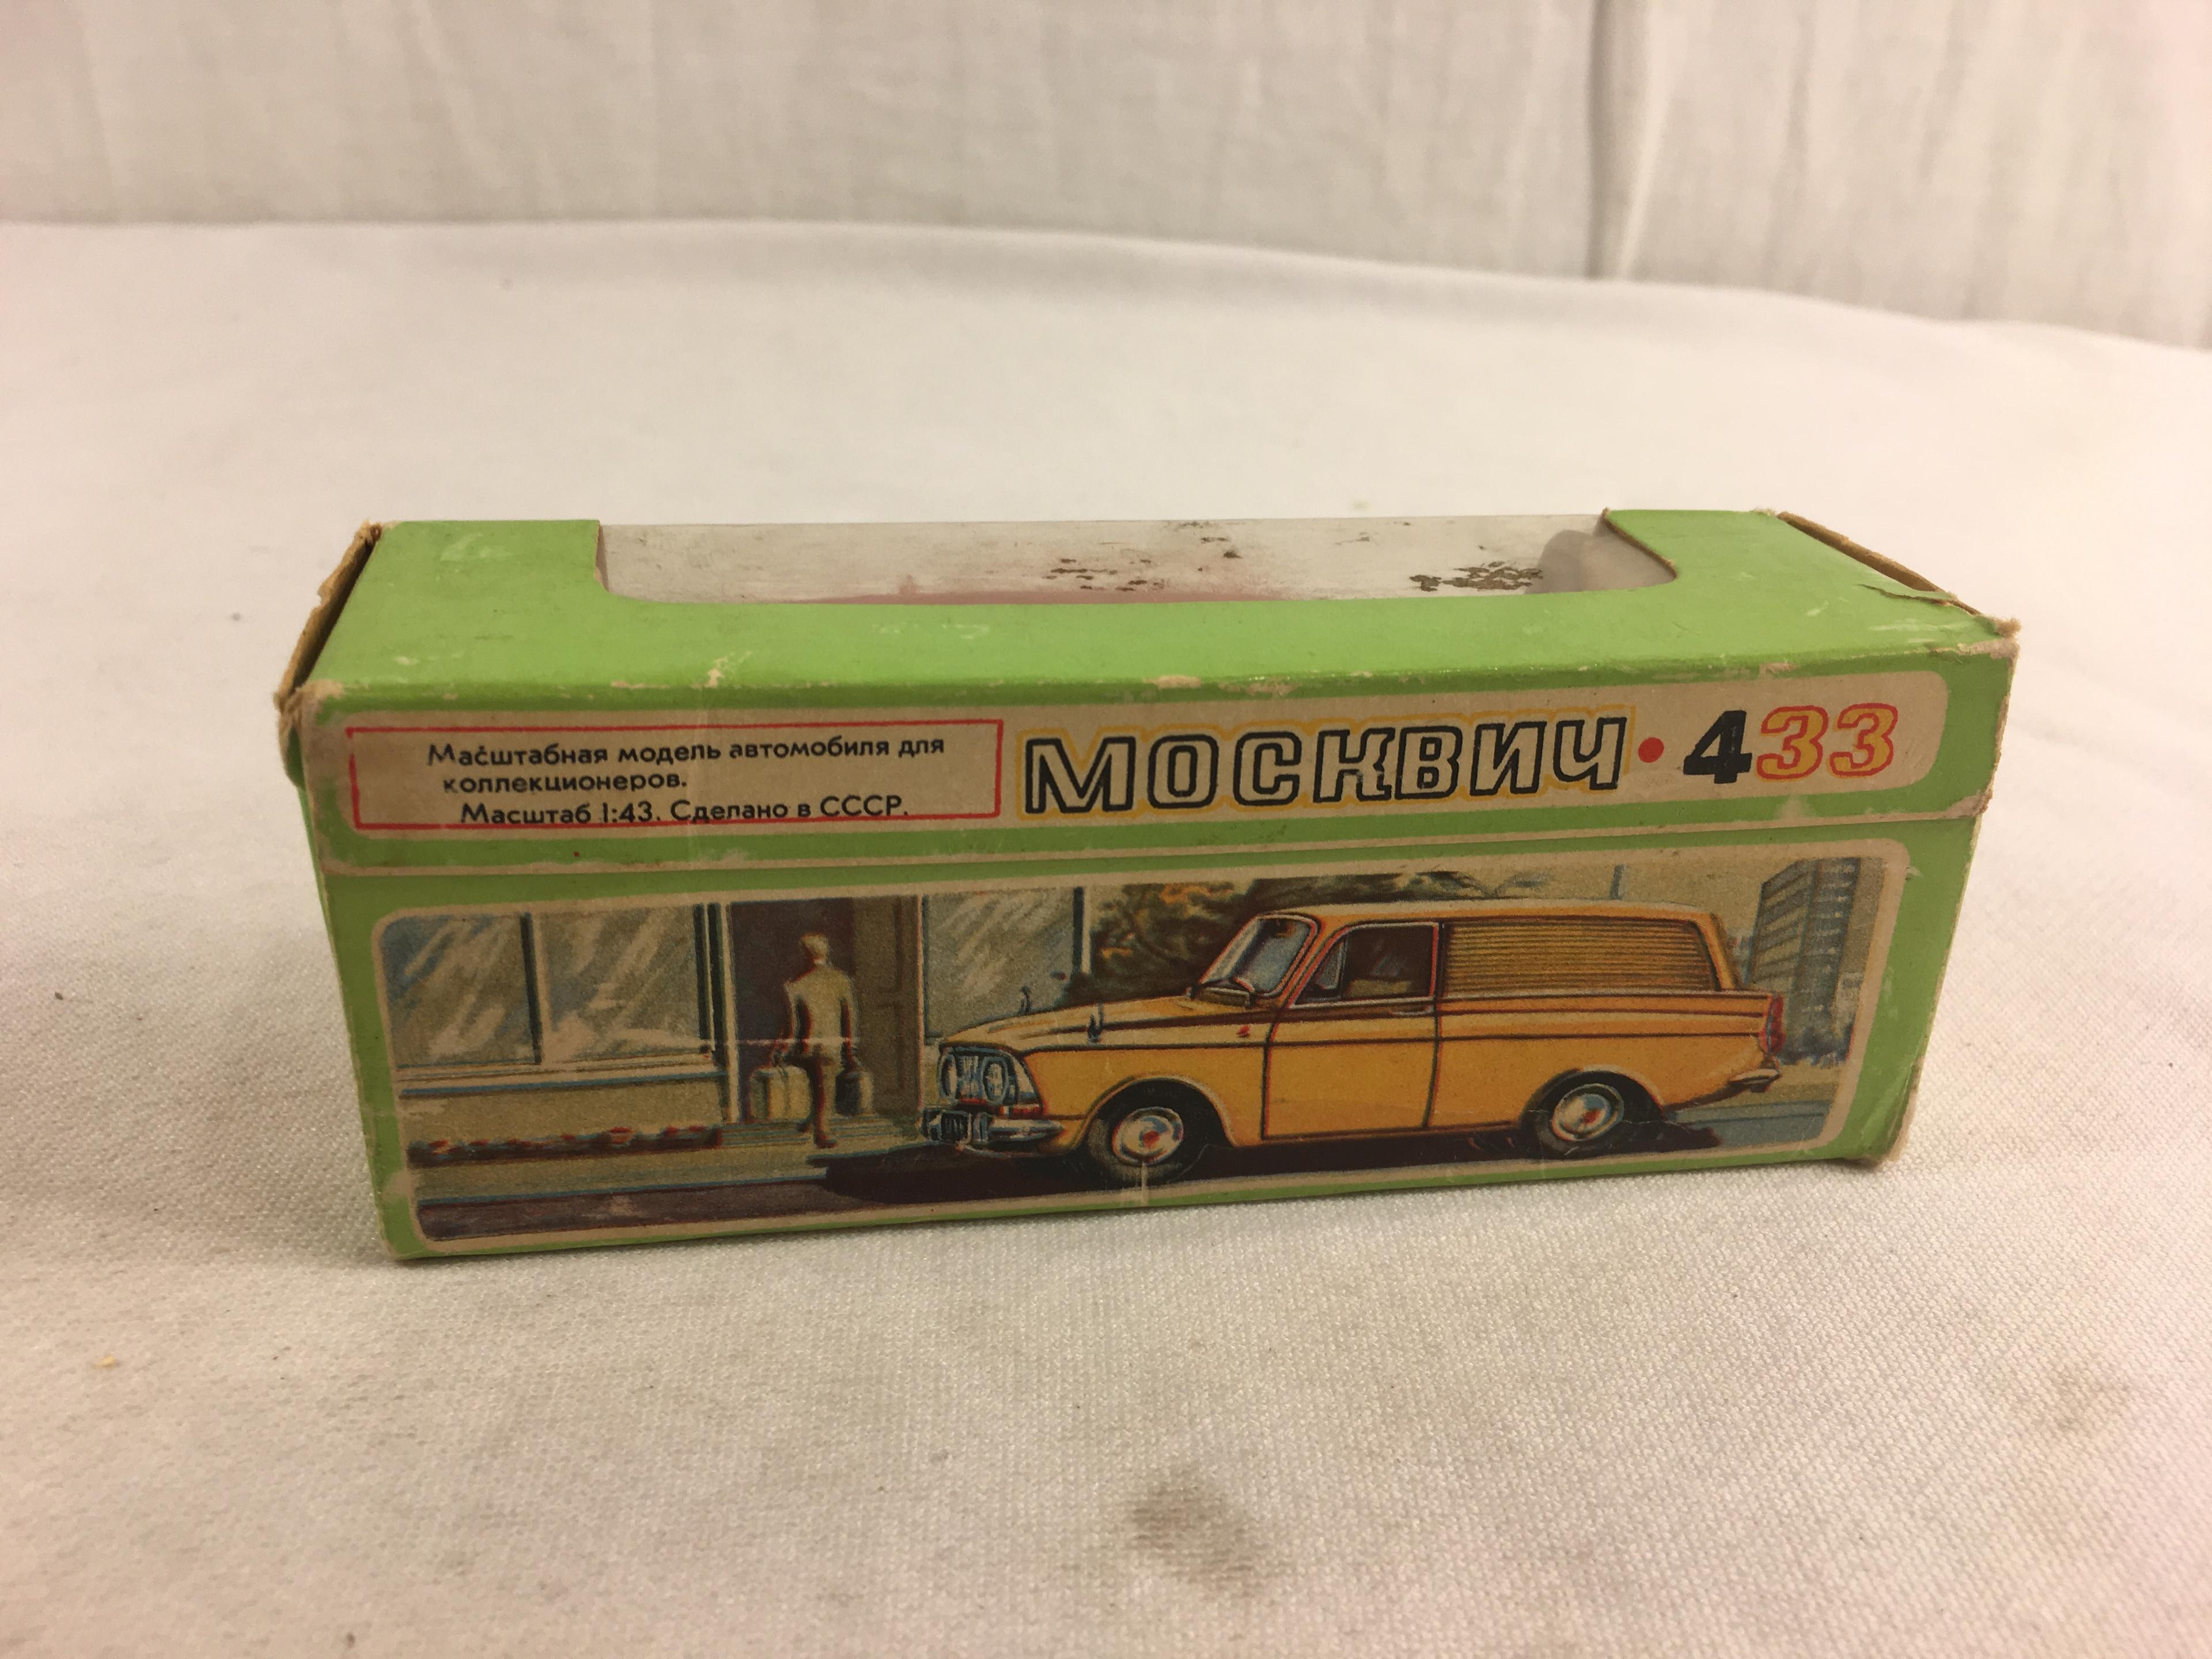 Collector Vintage CCCP Rusian Car Abtomo Novoexport  Red Die-cast Metal Car - See Pictures